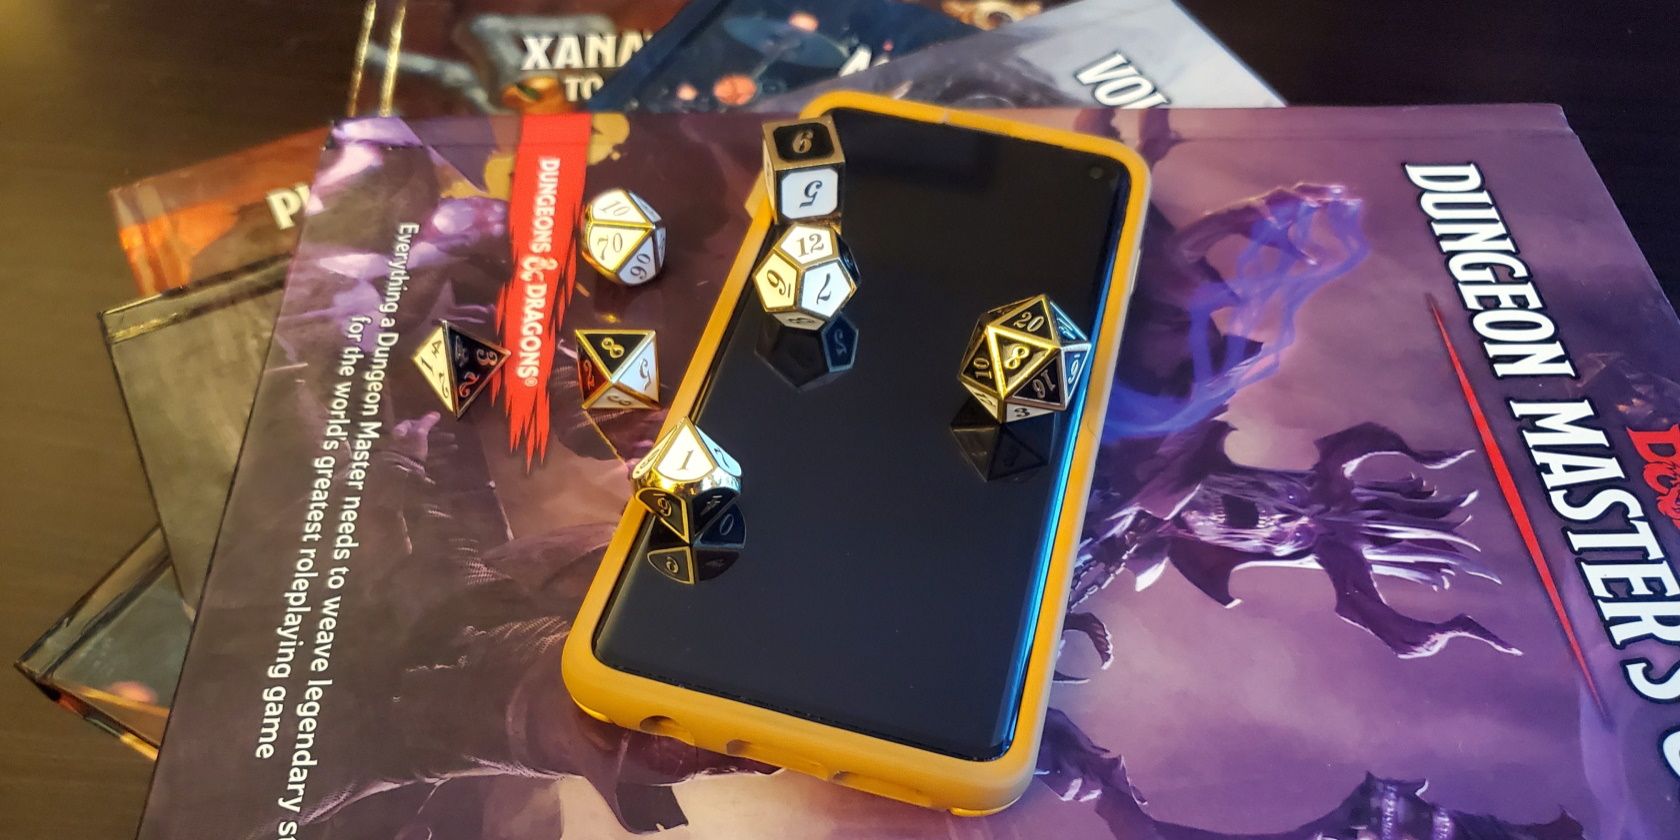 an android phone sits on top of some dungeons and dragons rulebooks, with a set of polyhedral dice scattered over it.